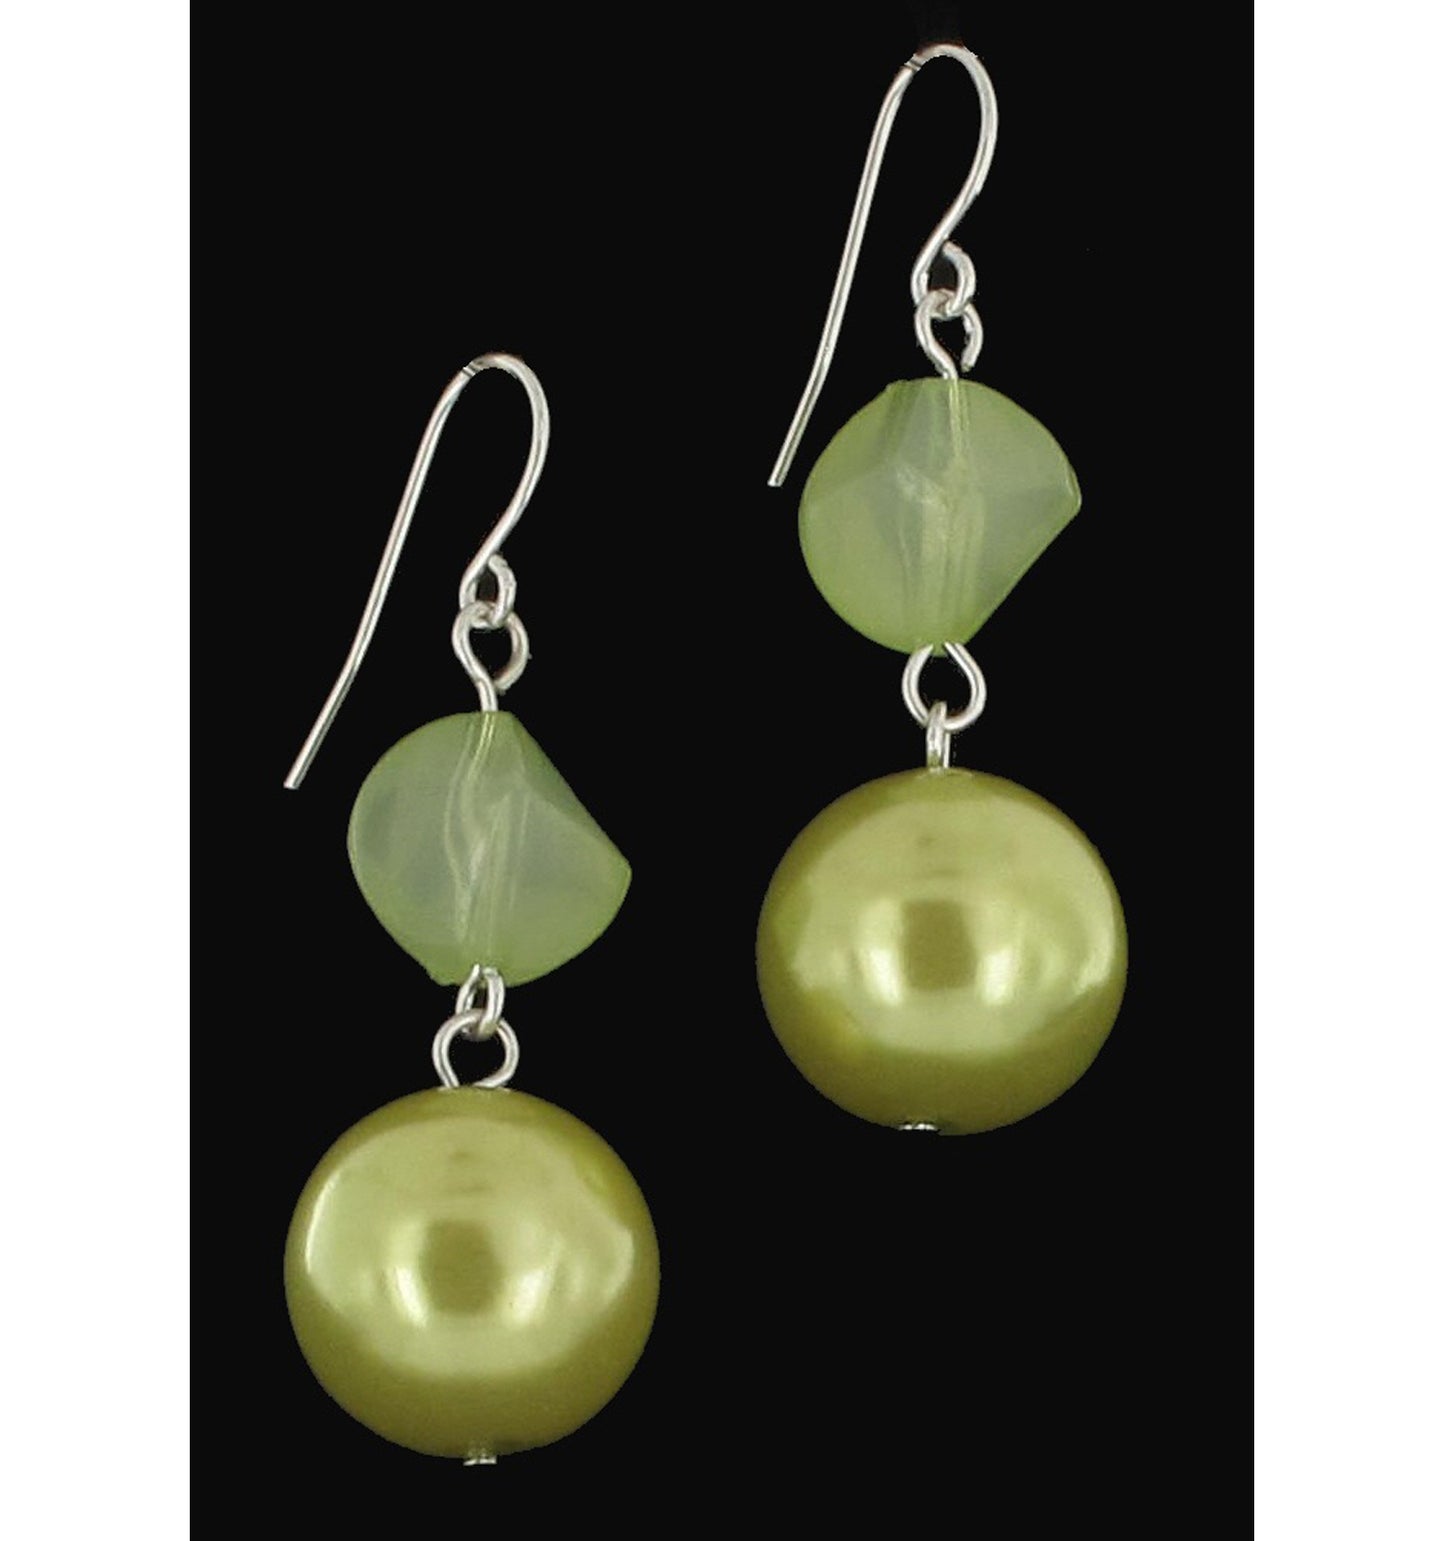 Pierced Earrings 2" + Silver Tone Layered Green Faux Pearl Necklace Set  32-38"